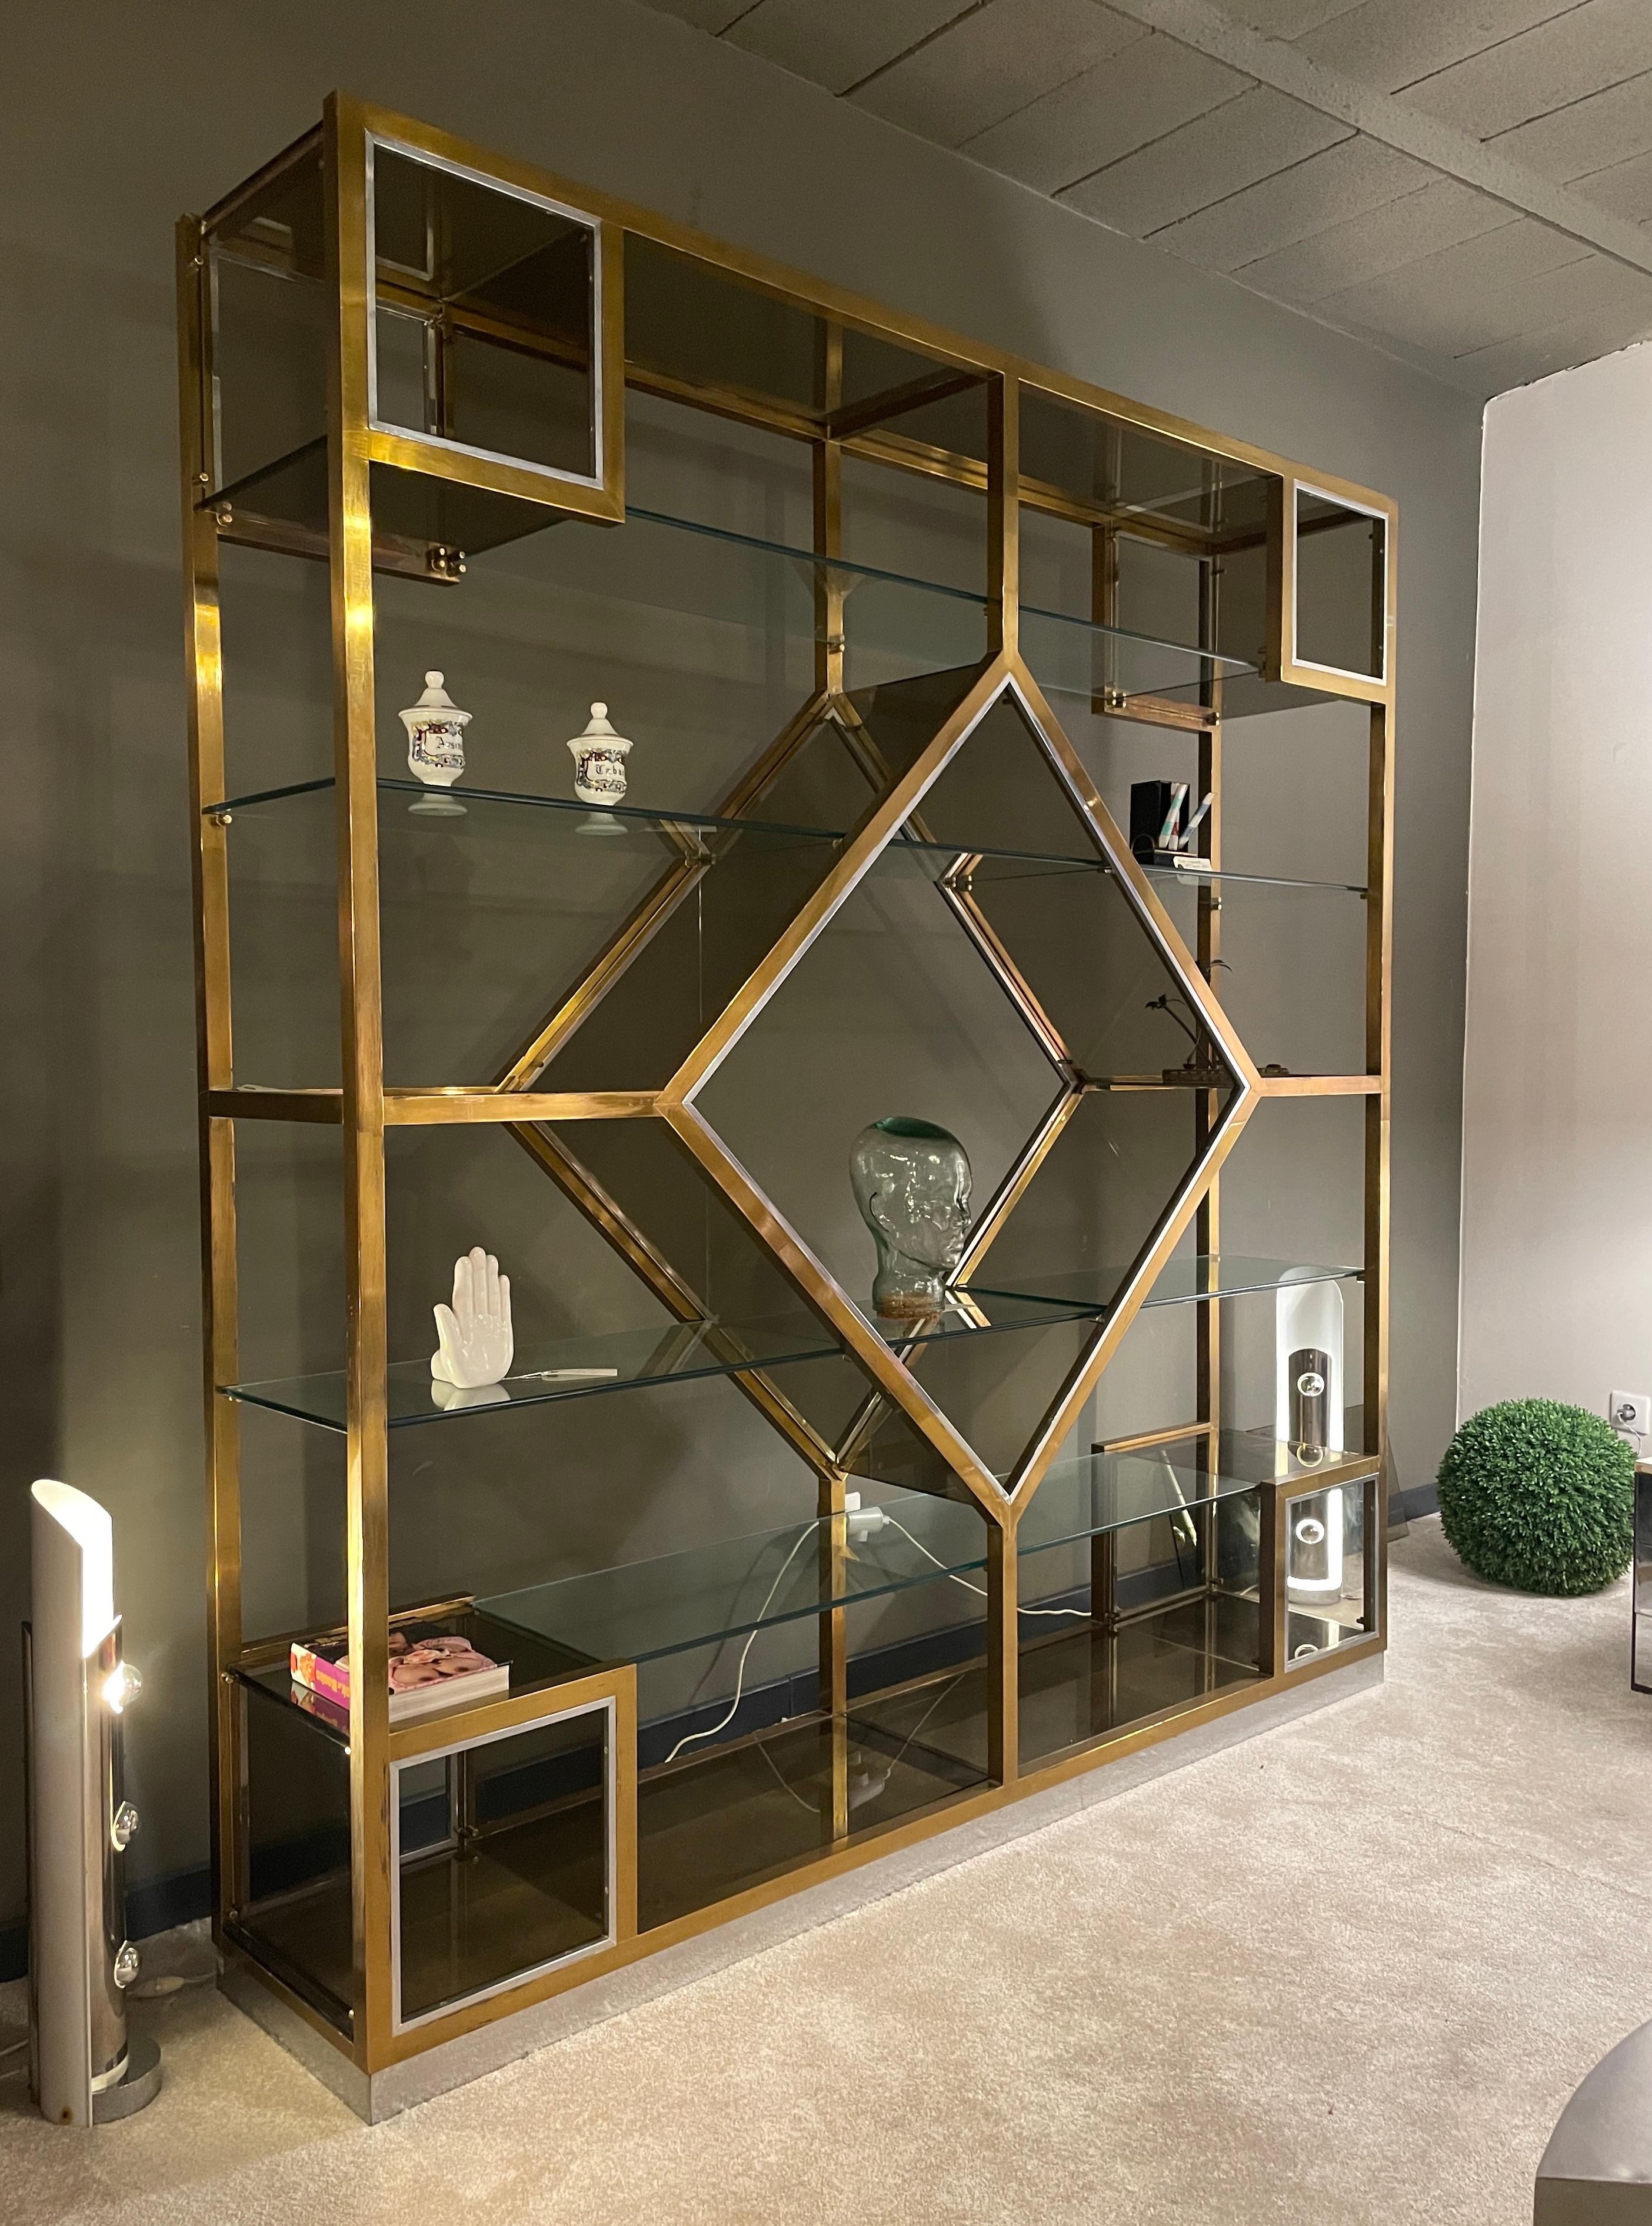 Bookcase, Etagere by Romeo Rega. Geometric shelving system.
Romeo Rega is a famous Italian designer. His work is inspired by Willy Rizzo, Kim Moltzer, Gabriella Crespi.
Spectacular brass and glass shelf.
1970s.
20th century.
Can be partially